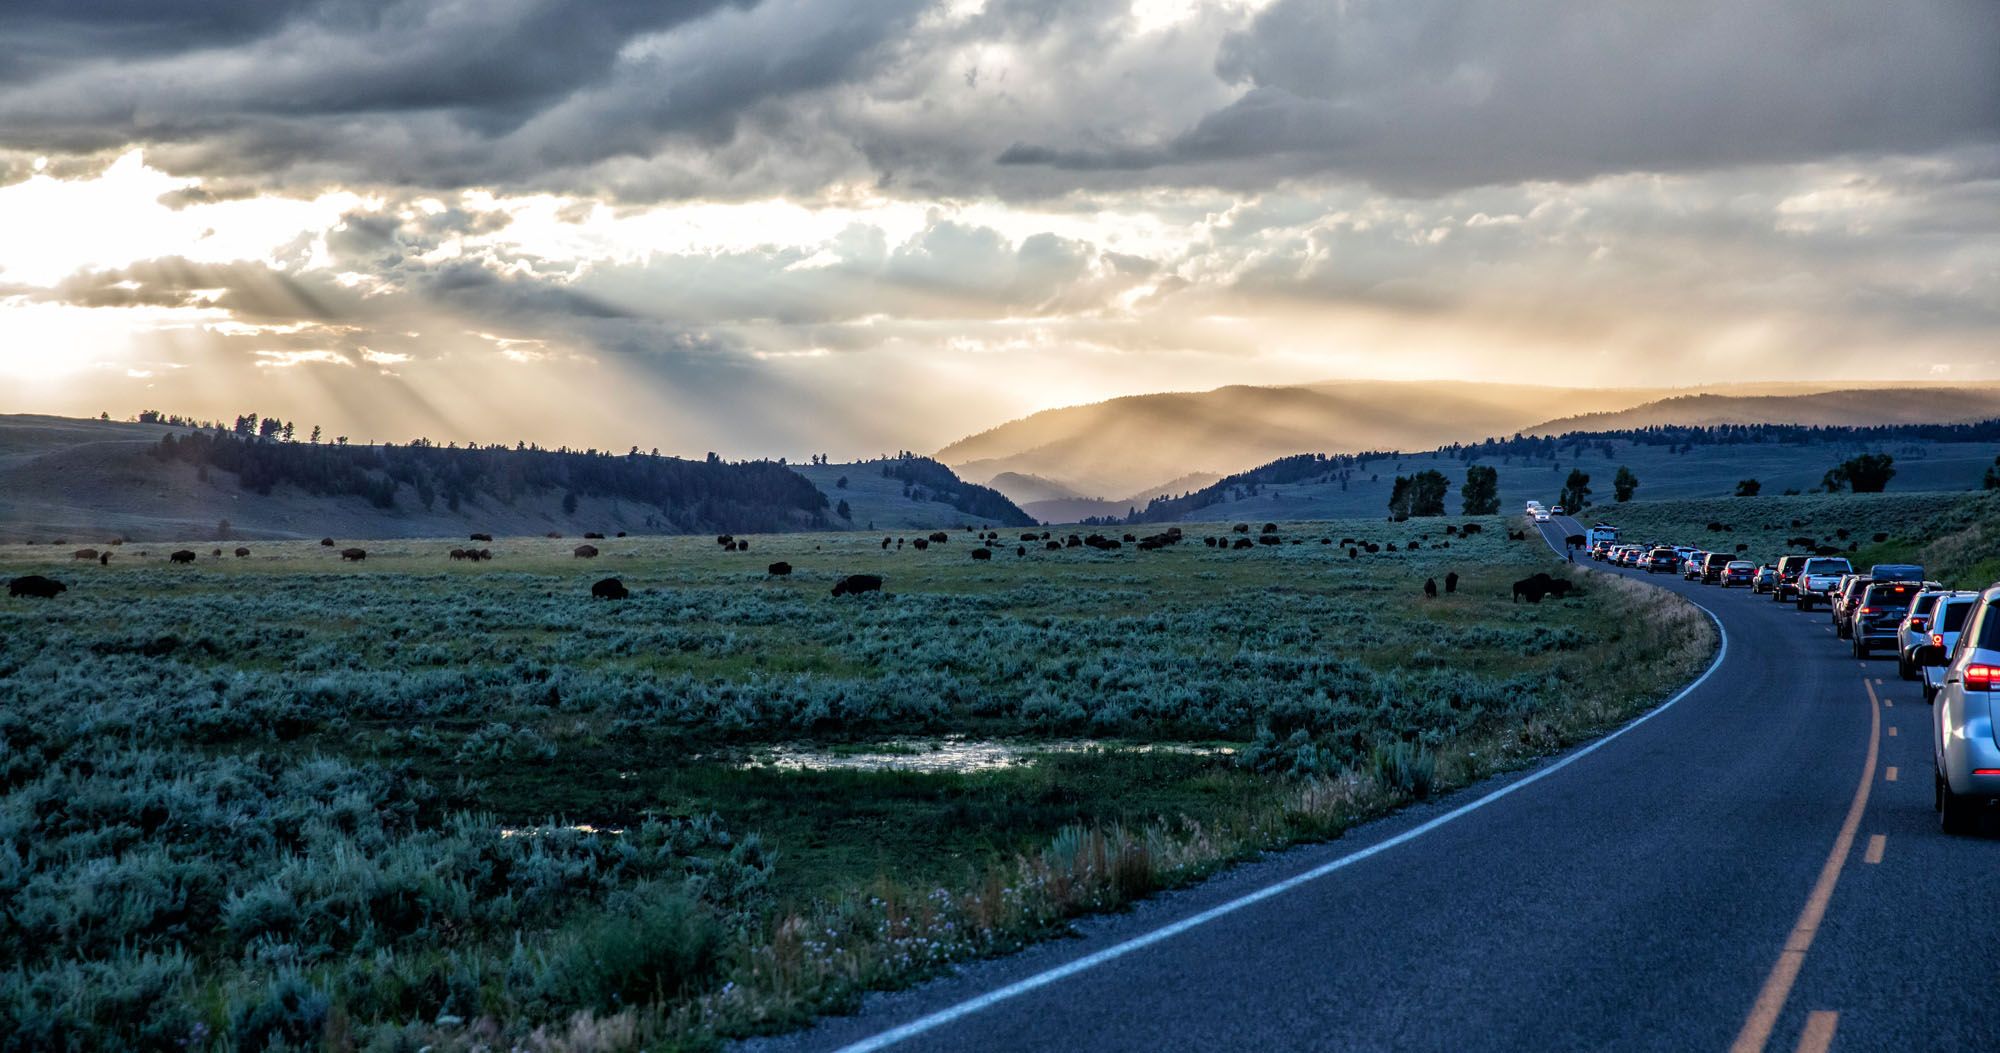 Featured image for “One Day in Yellowstone: 6 Epic Road Trip Itineraries”